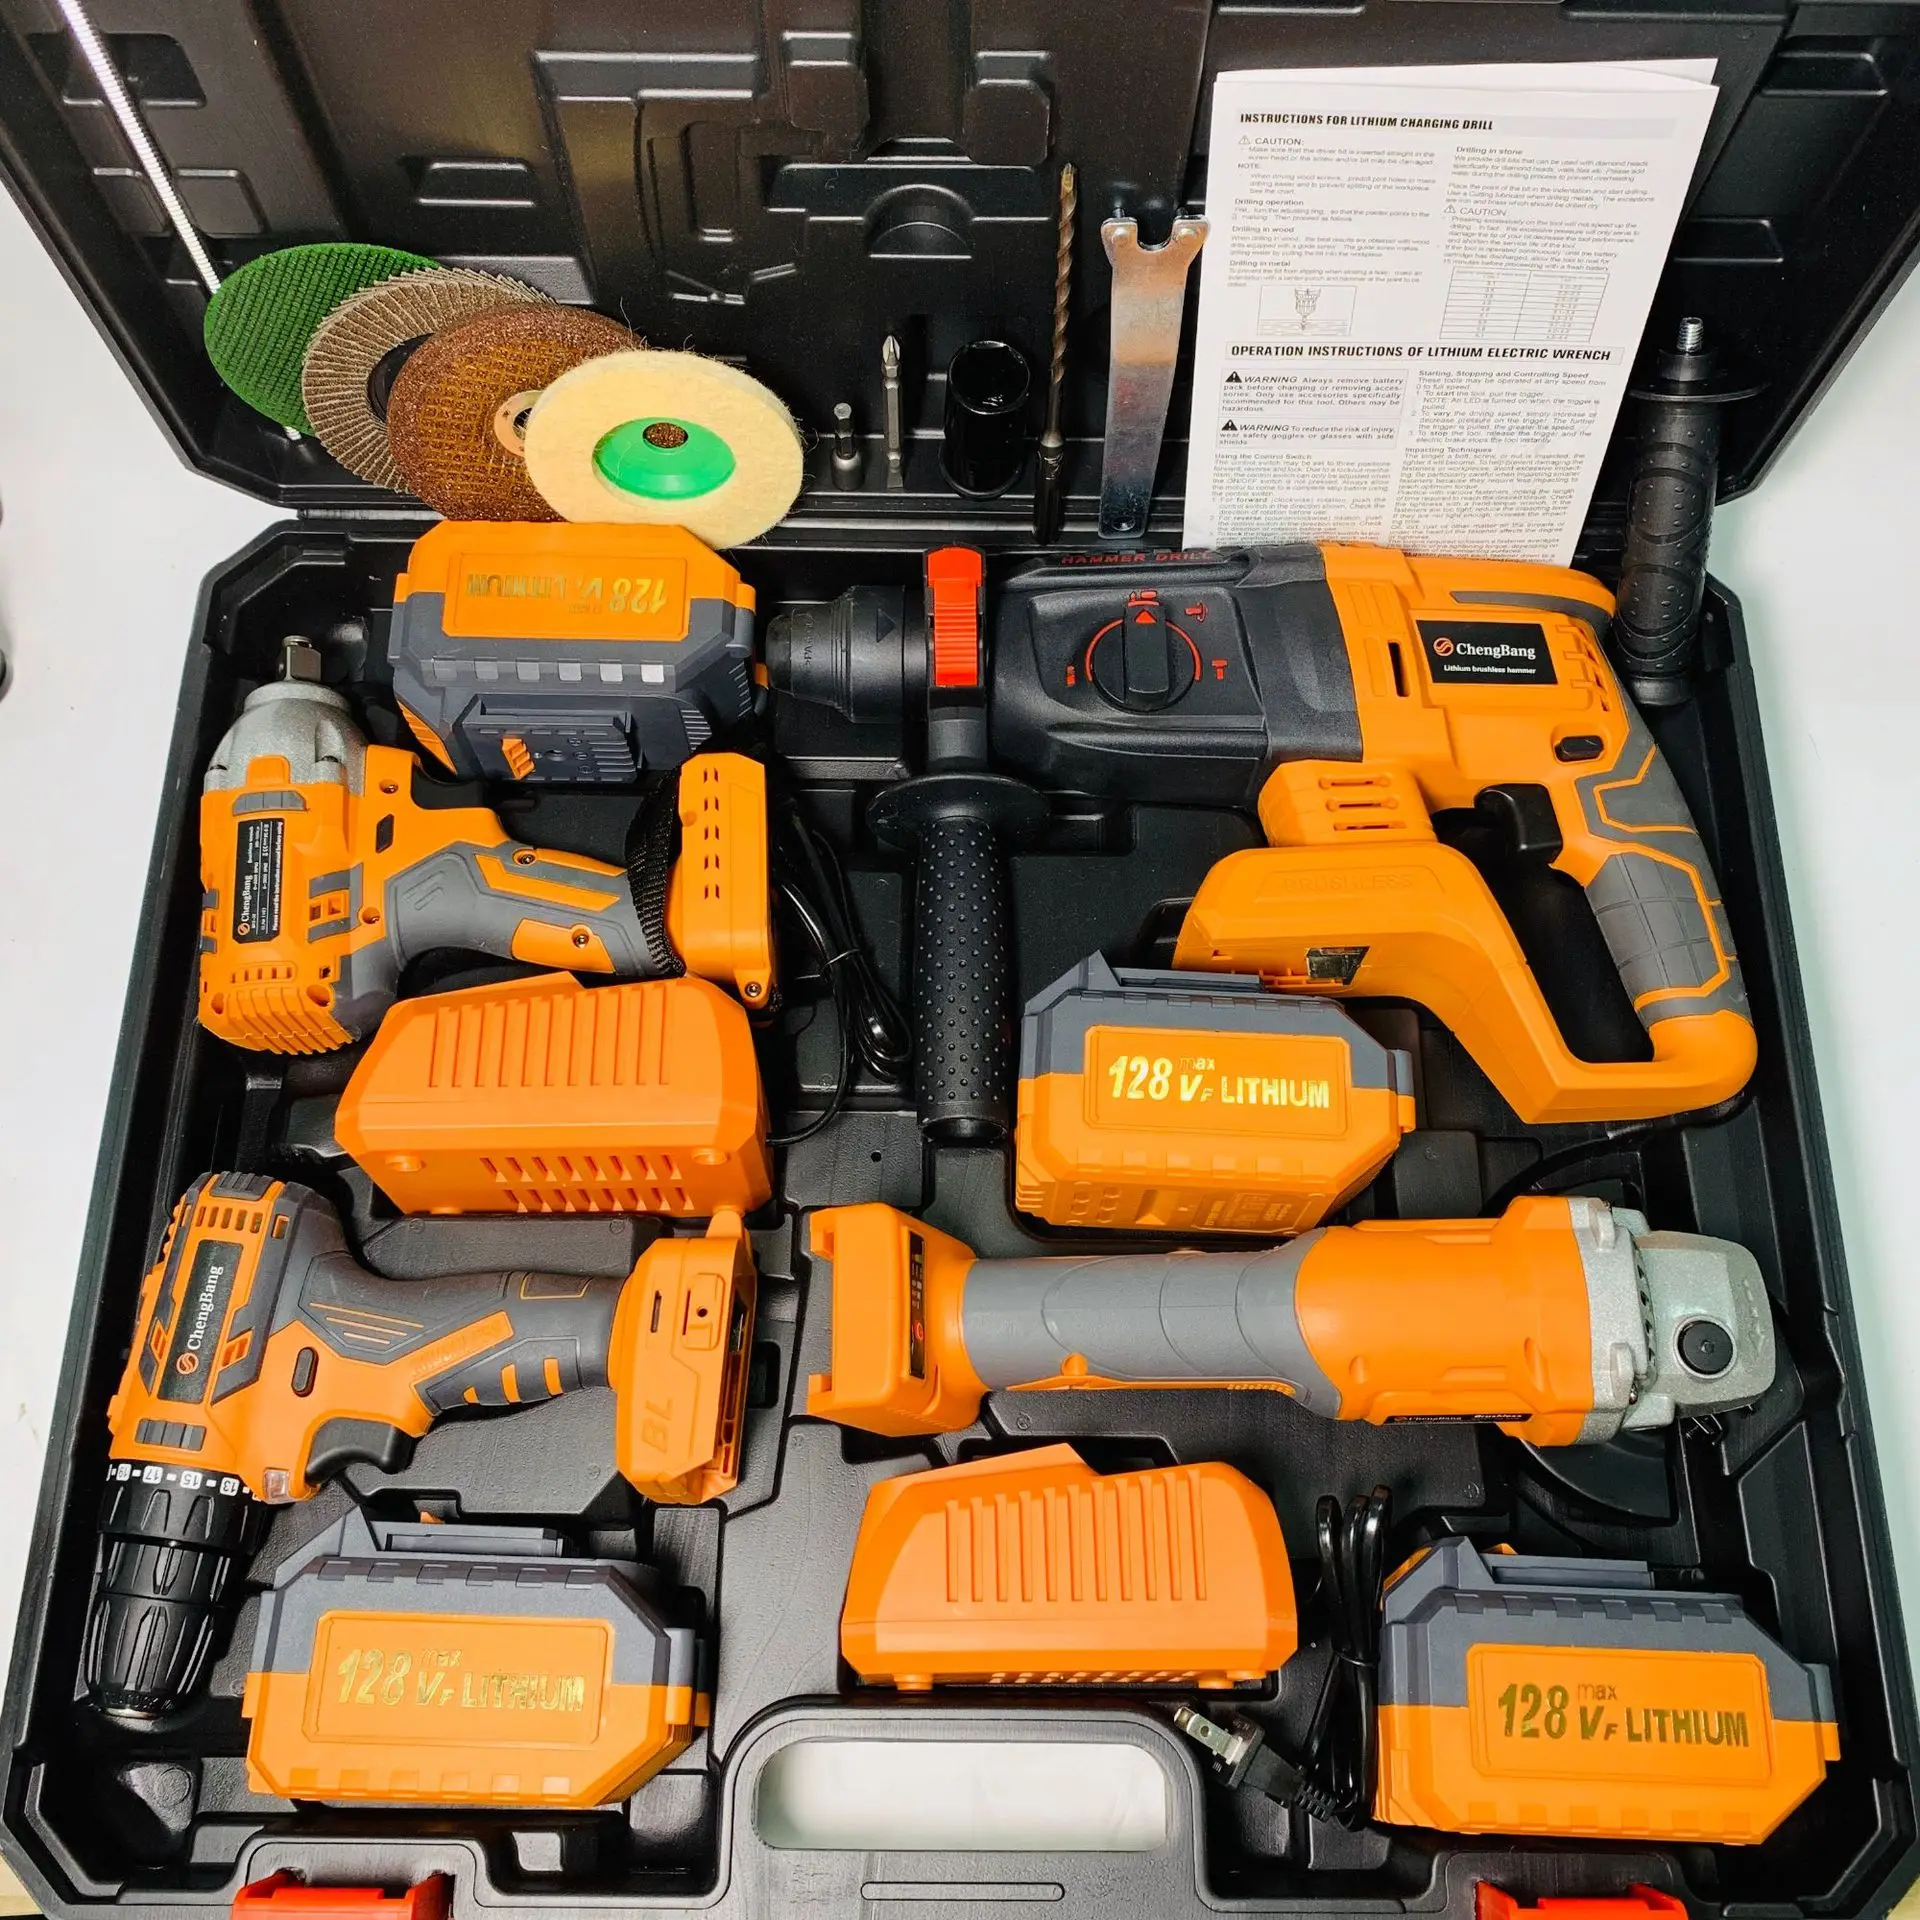 https://ae01.alicdn.com/kf/S28a26d935c764db7b2b16927469906c0w/Set-of-4pcs-Power-Tools-Kits-Portable-Lithium-Electric-Hammer-Drill-Brushless-Angle-Grinder-Cordless-Wrench.jpg